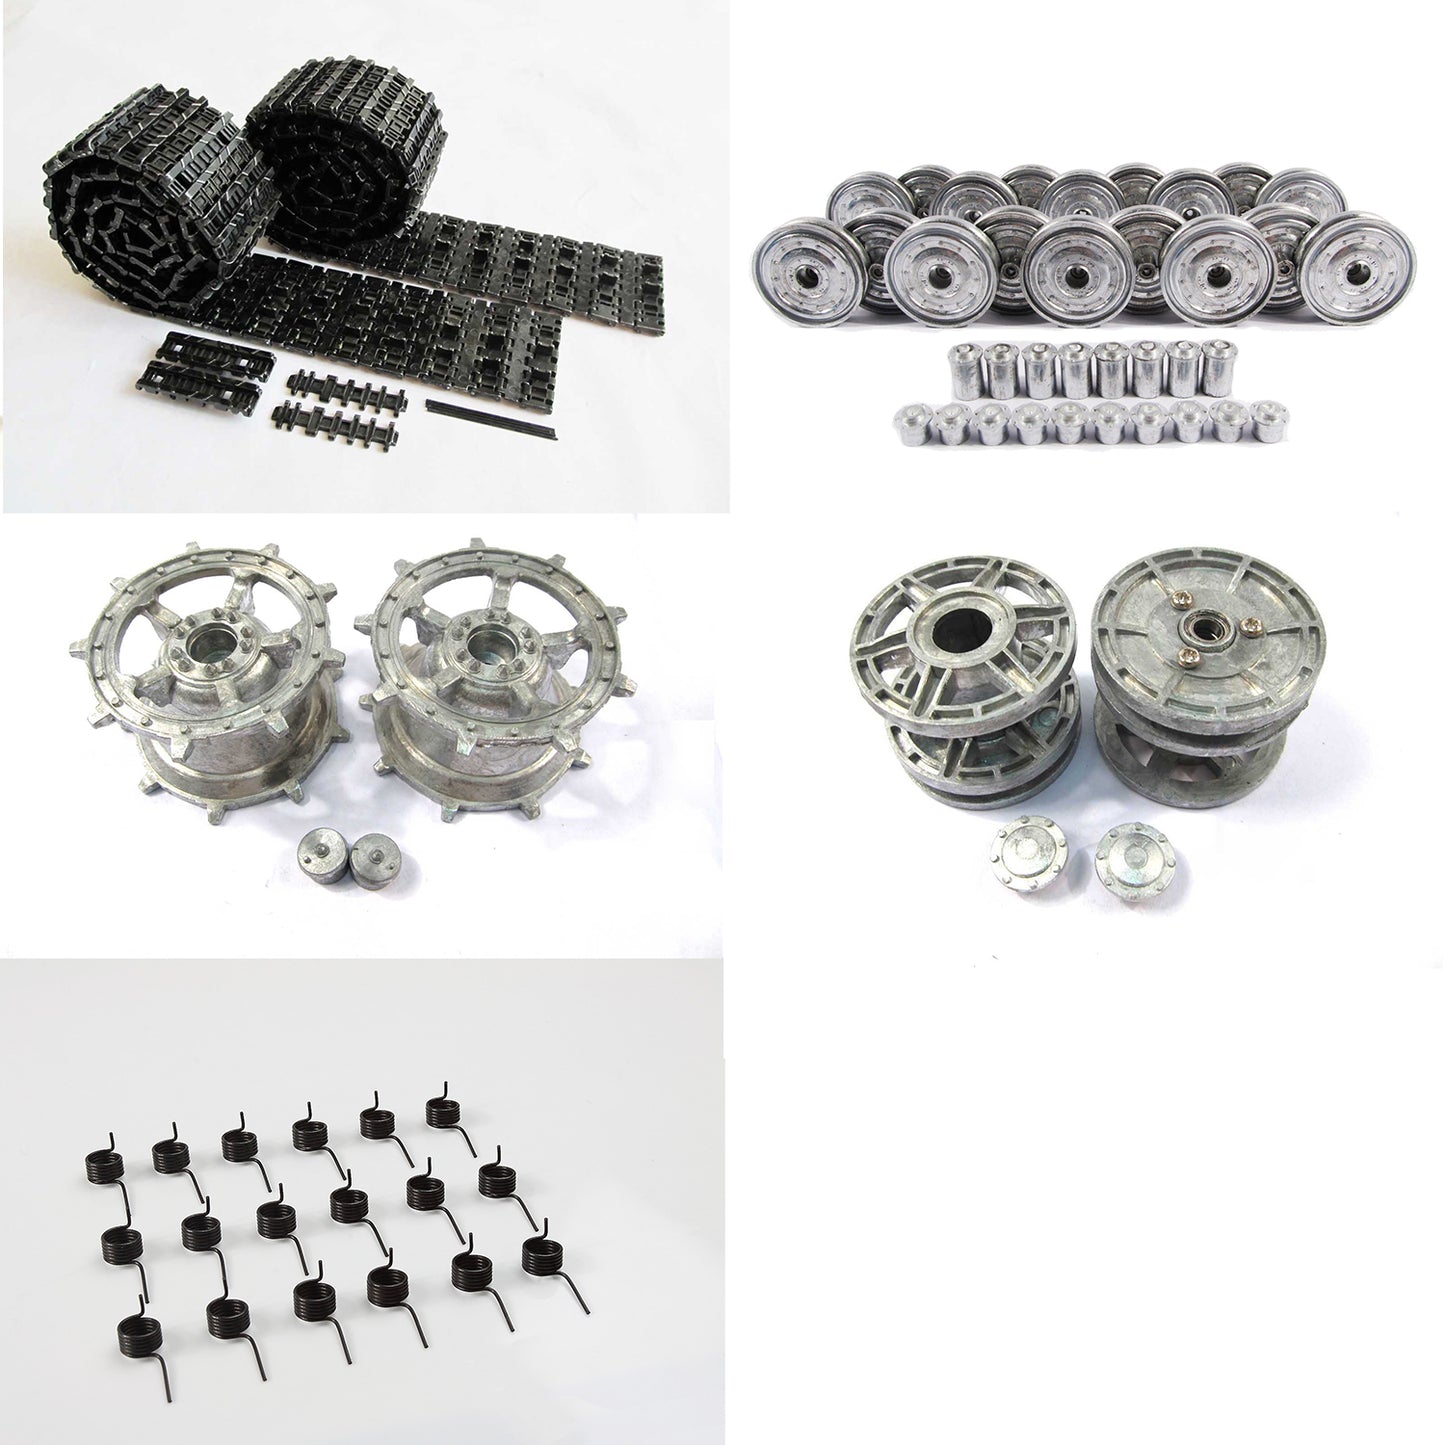 Mato 1/16 Metal Upgraded Spring Set Tracks Sprockets Idlers Road Wheels for German King Tiger 1228 RTR Radio Controlled Tank